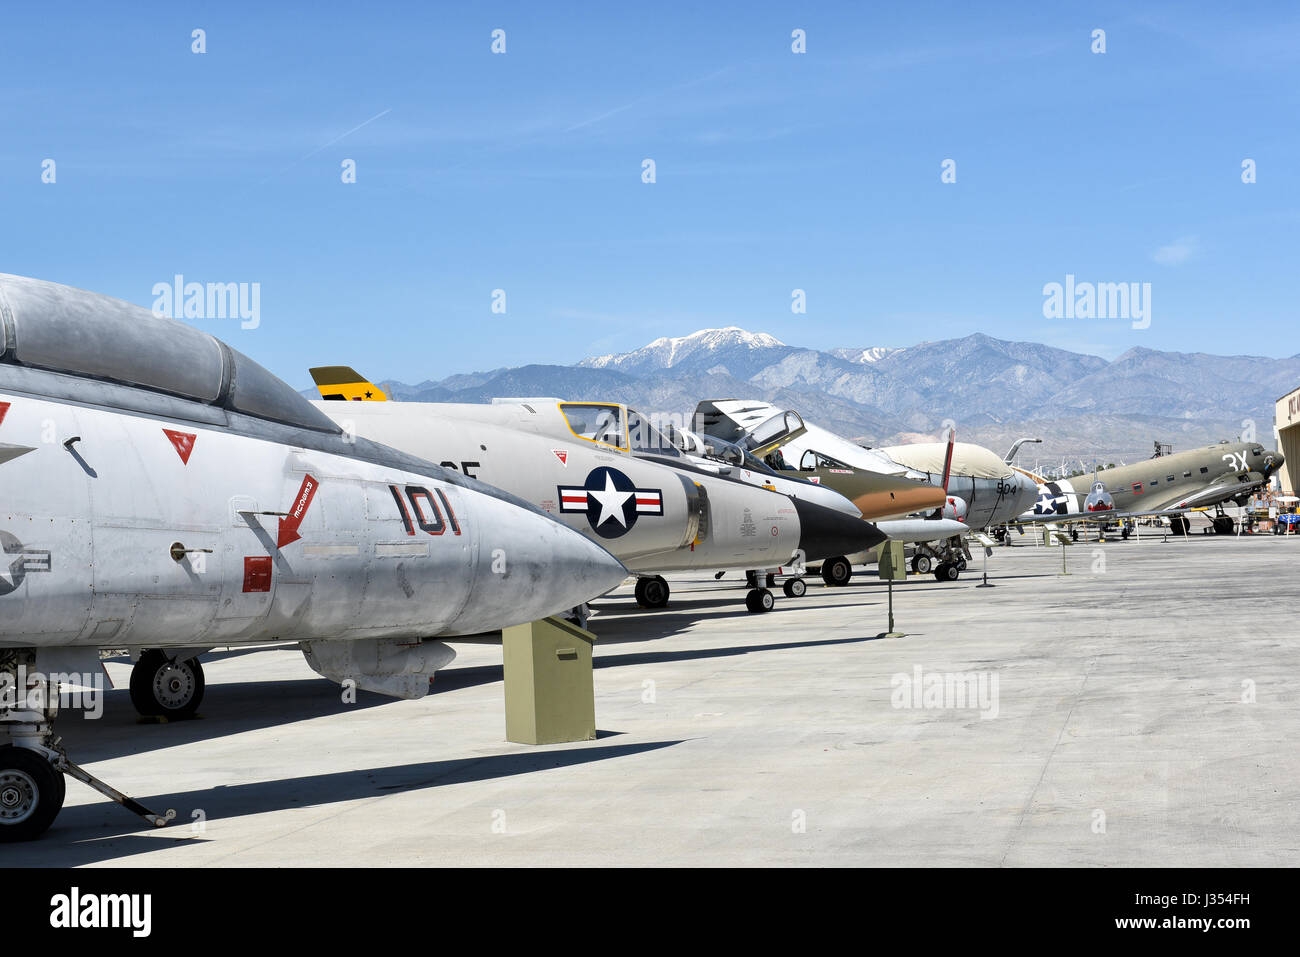 PALM SPRINGS, CALIFORNIA - MARCH 24, 2017: A line of vintage war planes at the Palm Springs Air Museum, Palm Springs, California, USA Stock Photo